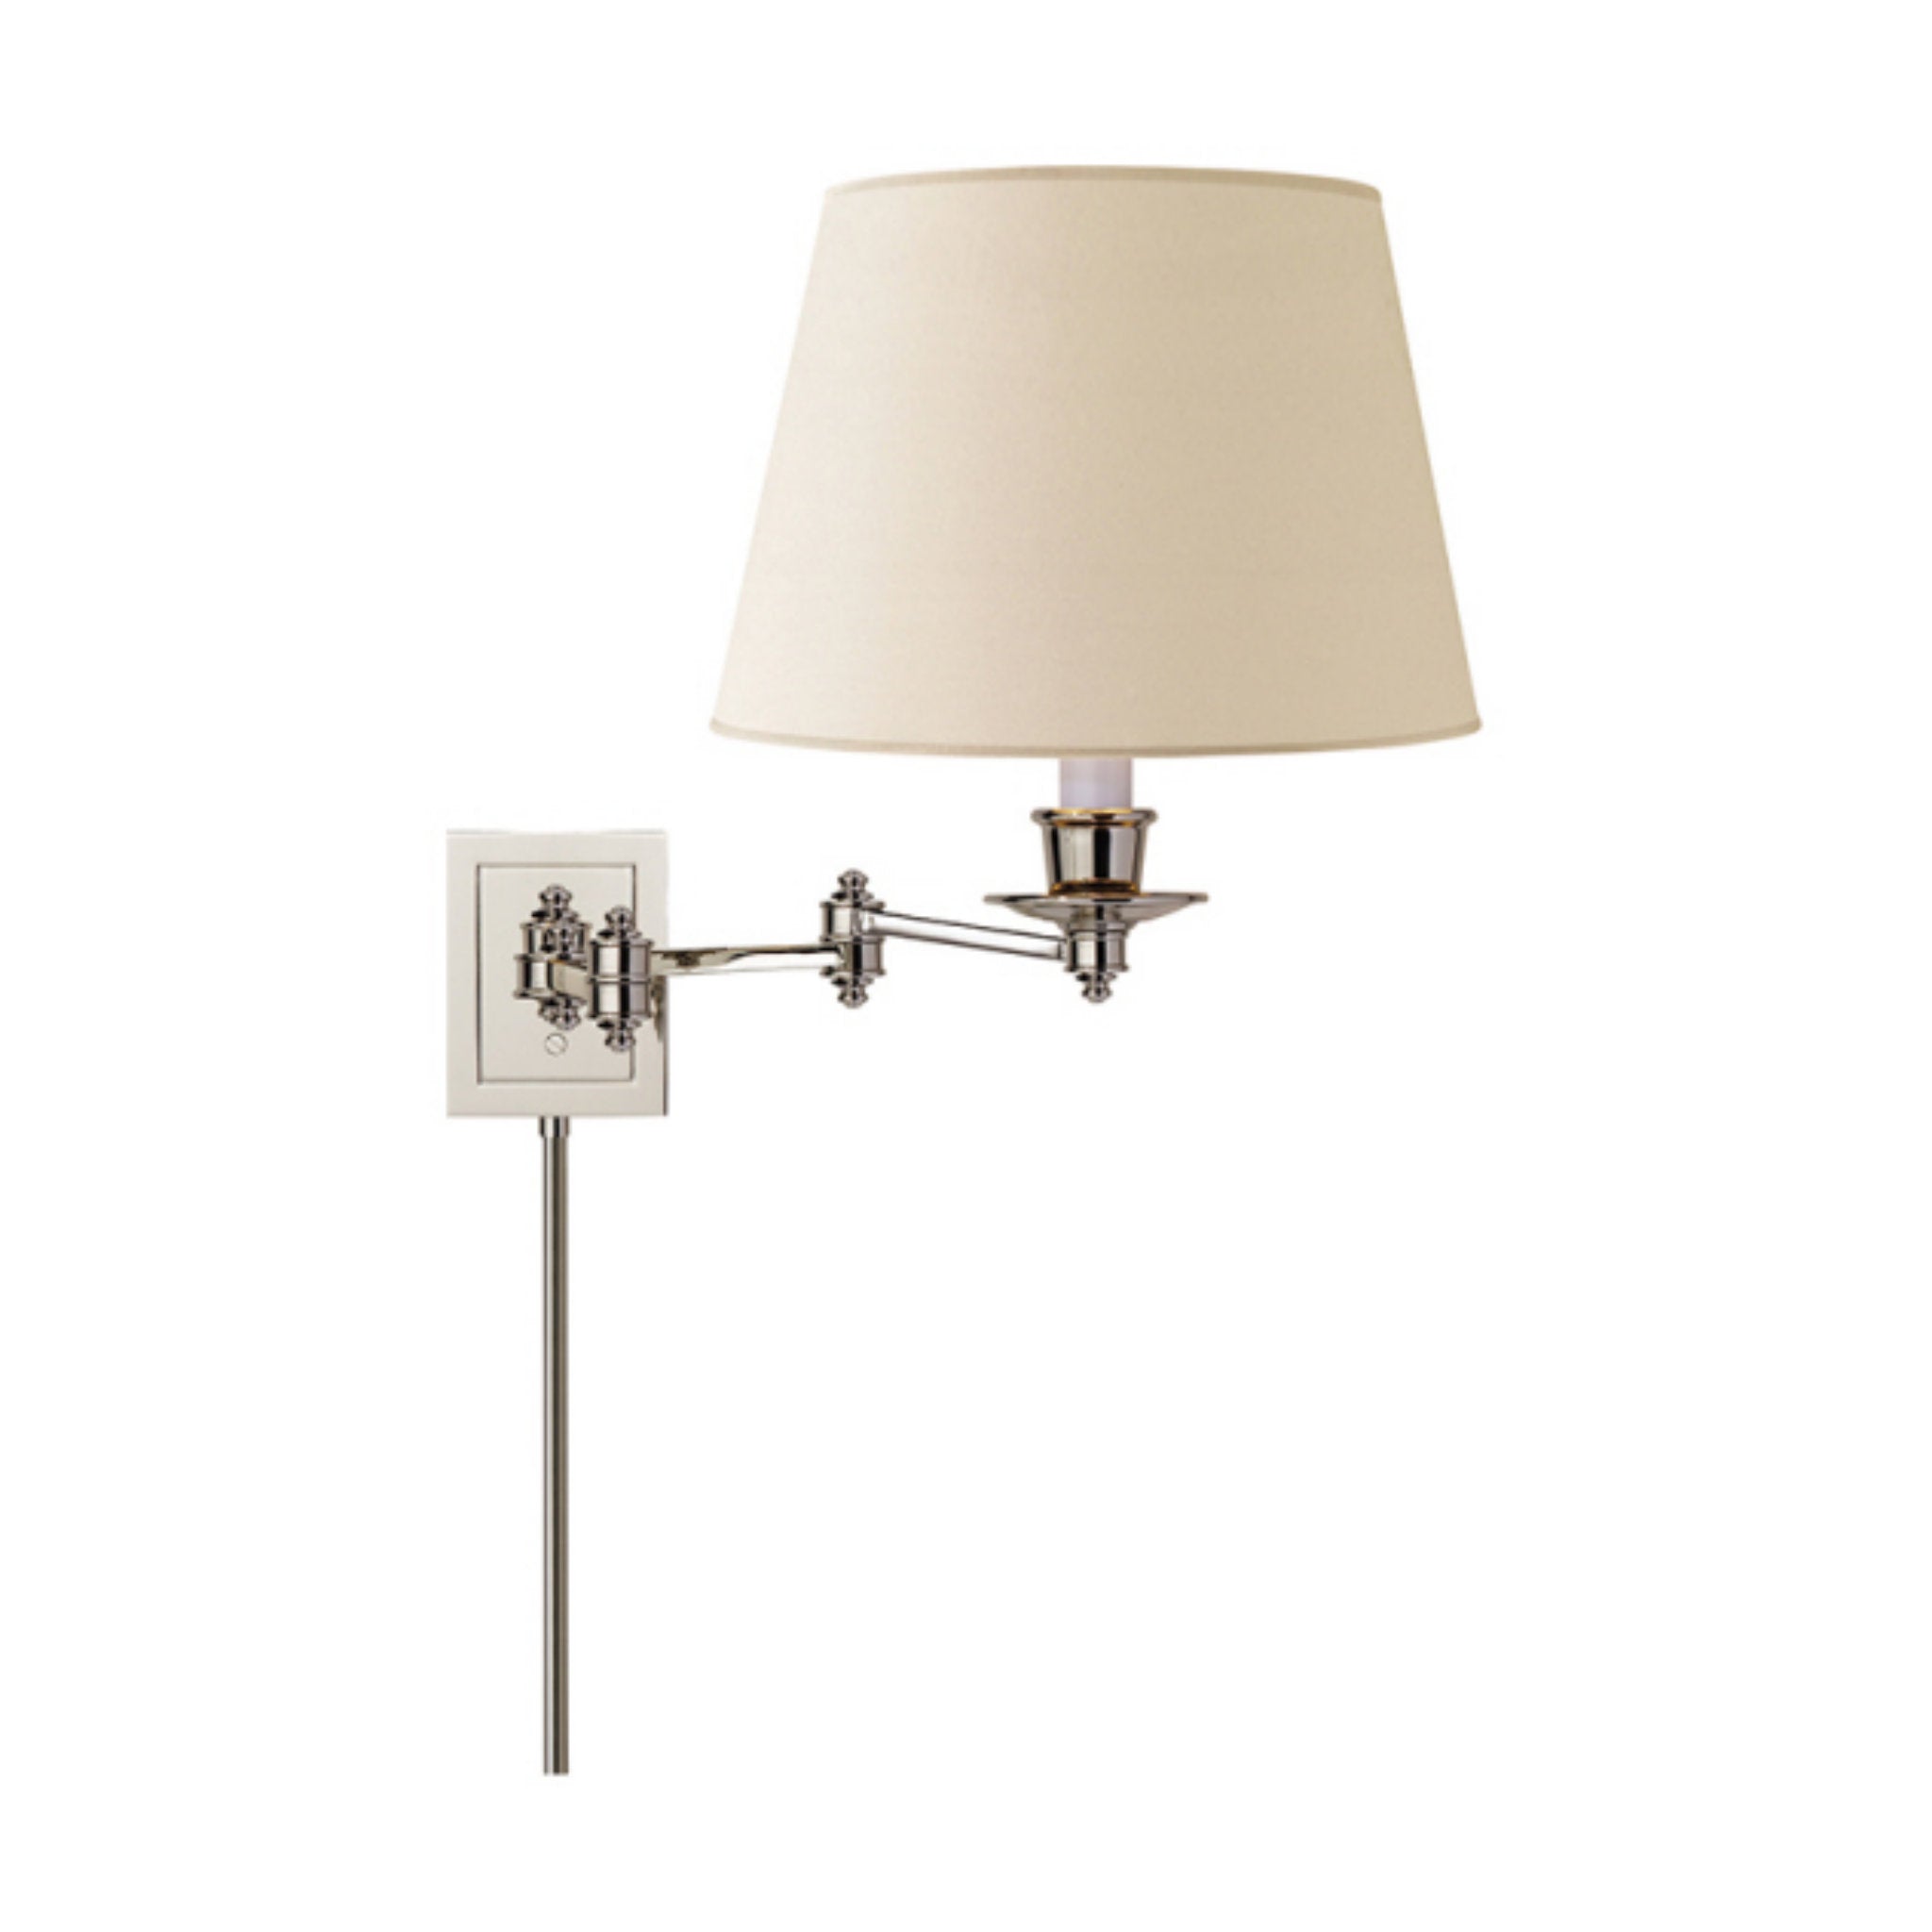 Visual Comfort Triple Swing Arm Wall Lamp in Polished Nickel with Linen Shade